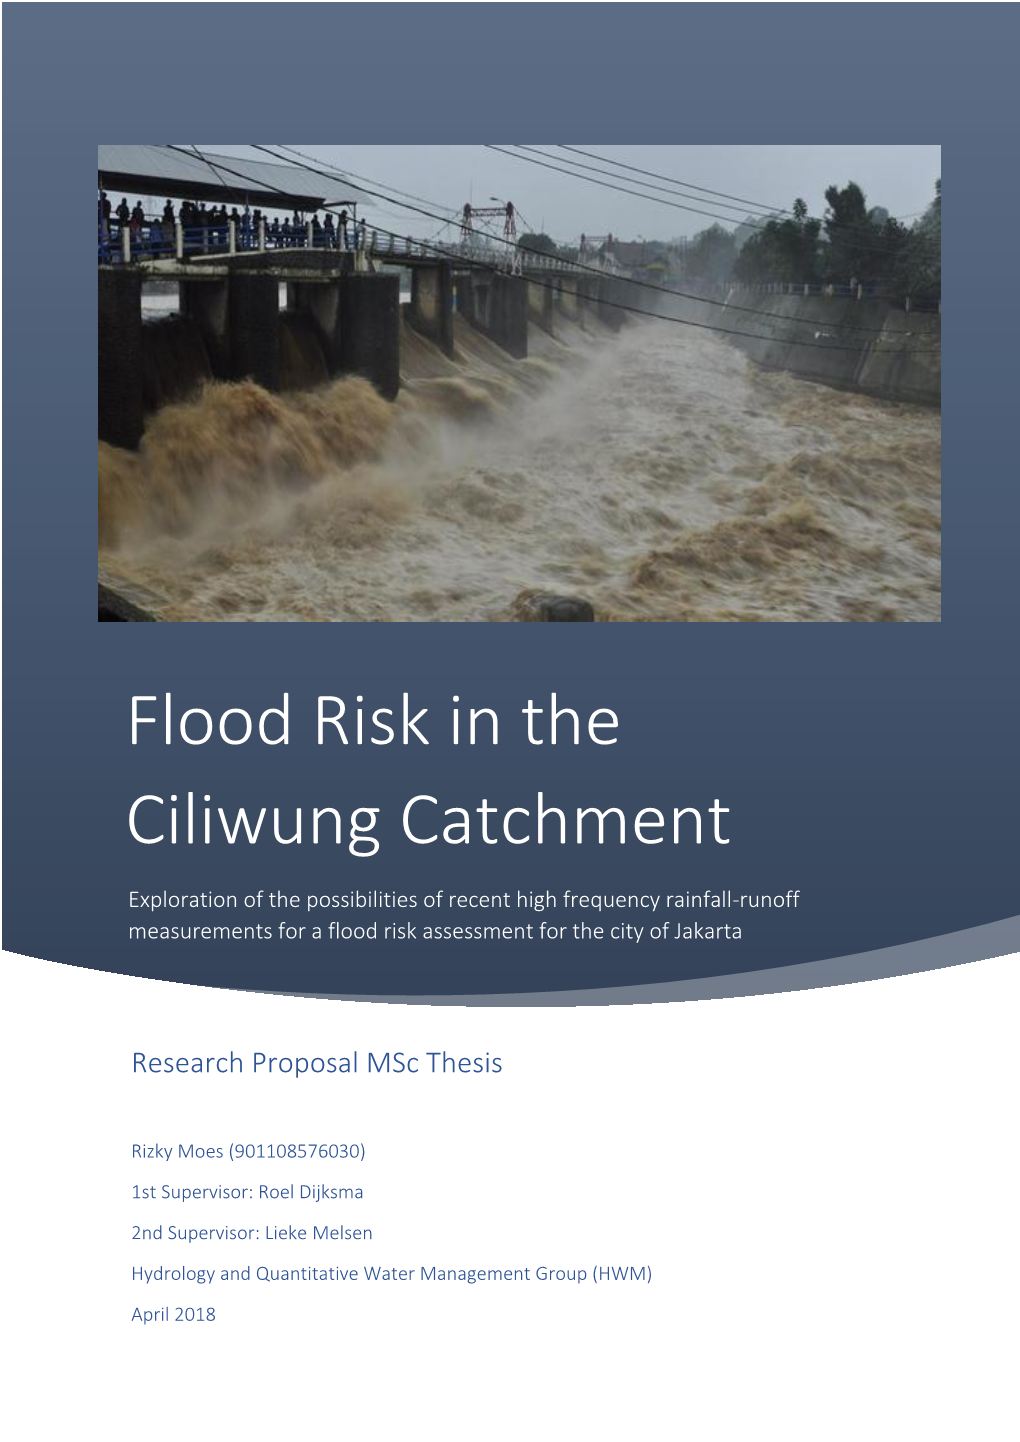 Flood Risk in the Ciliwung Catchment